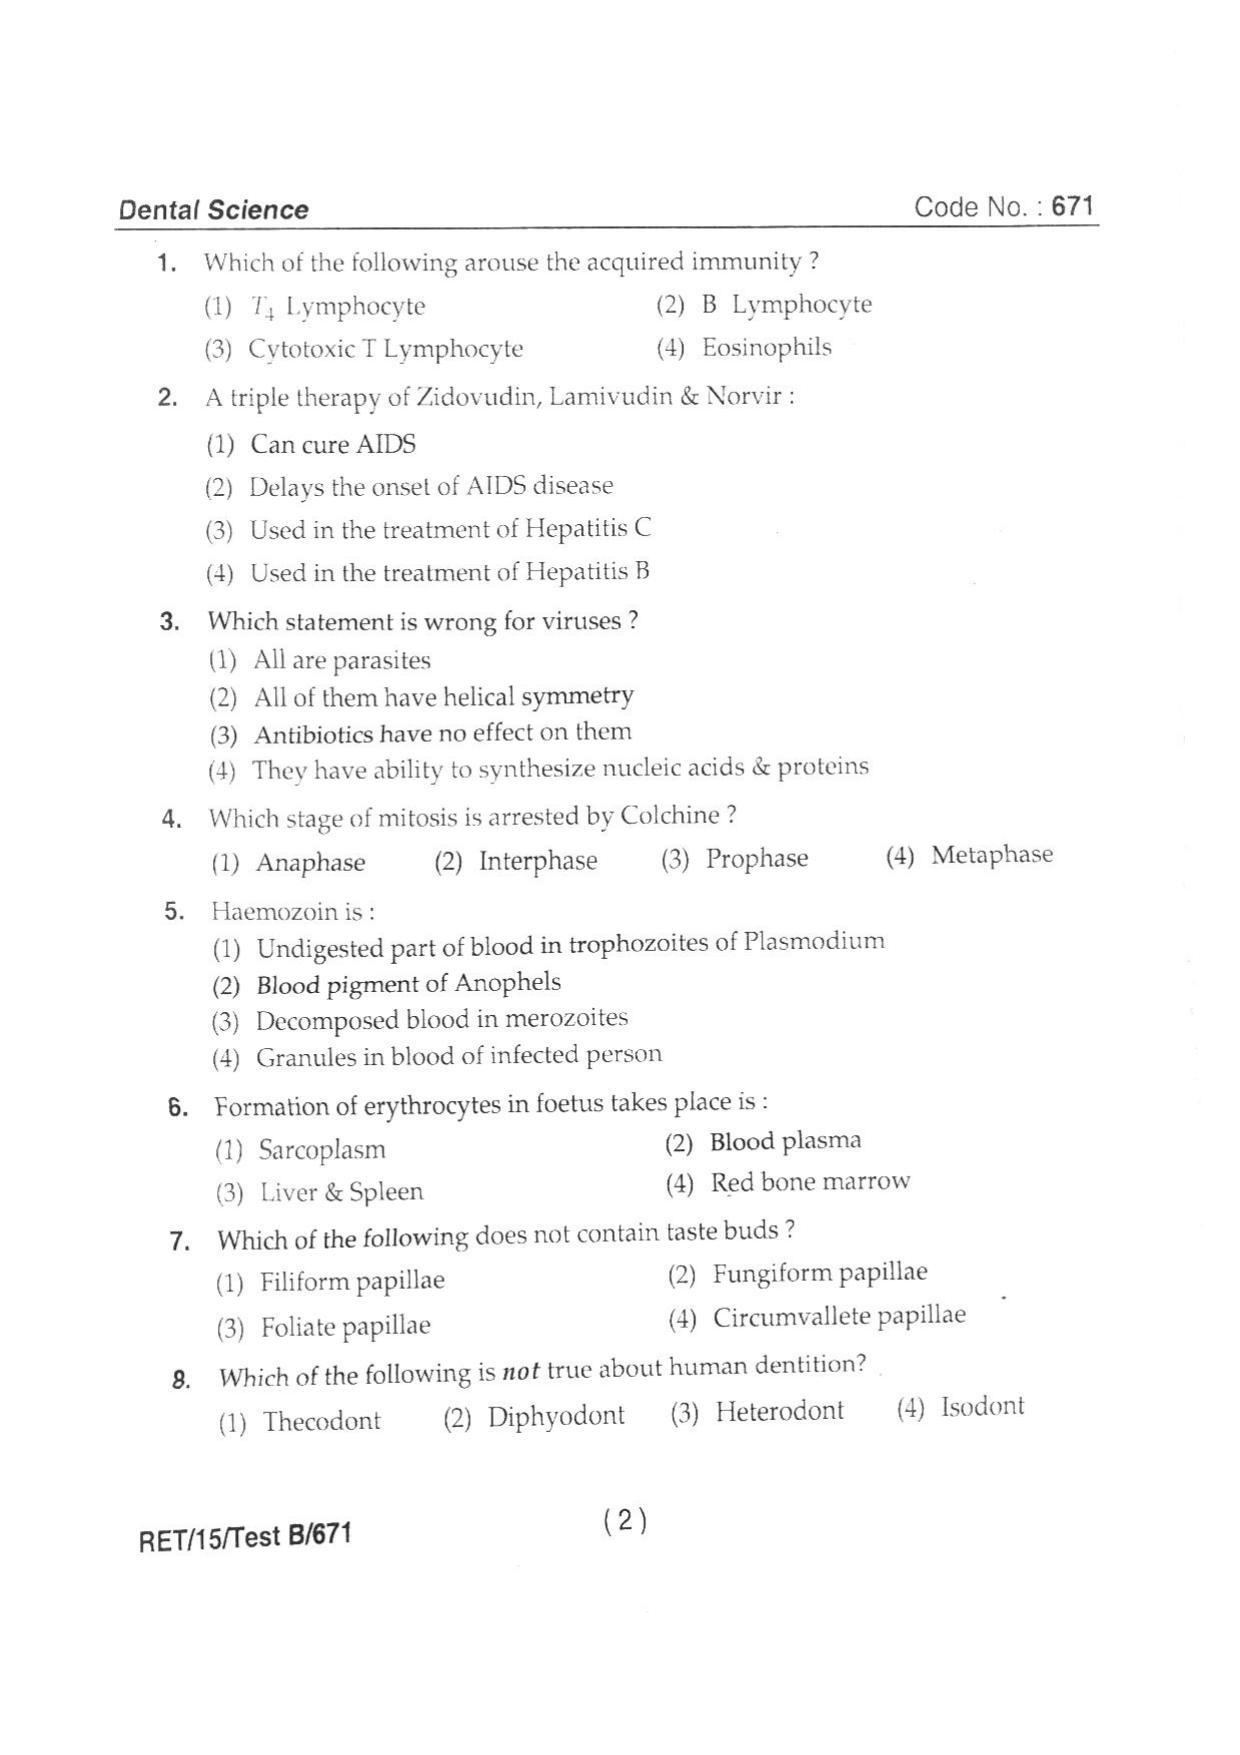 BHU RET DENTAL SCIENCE 2015 Question Paper - Page 4